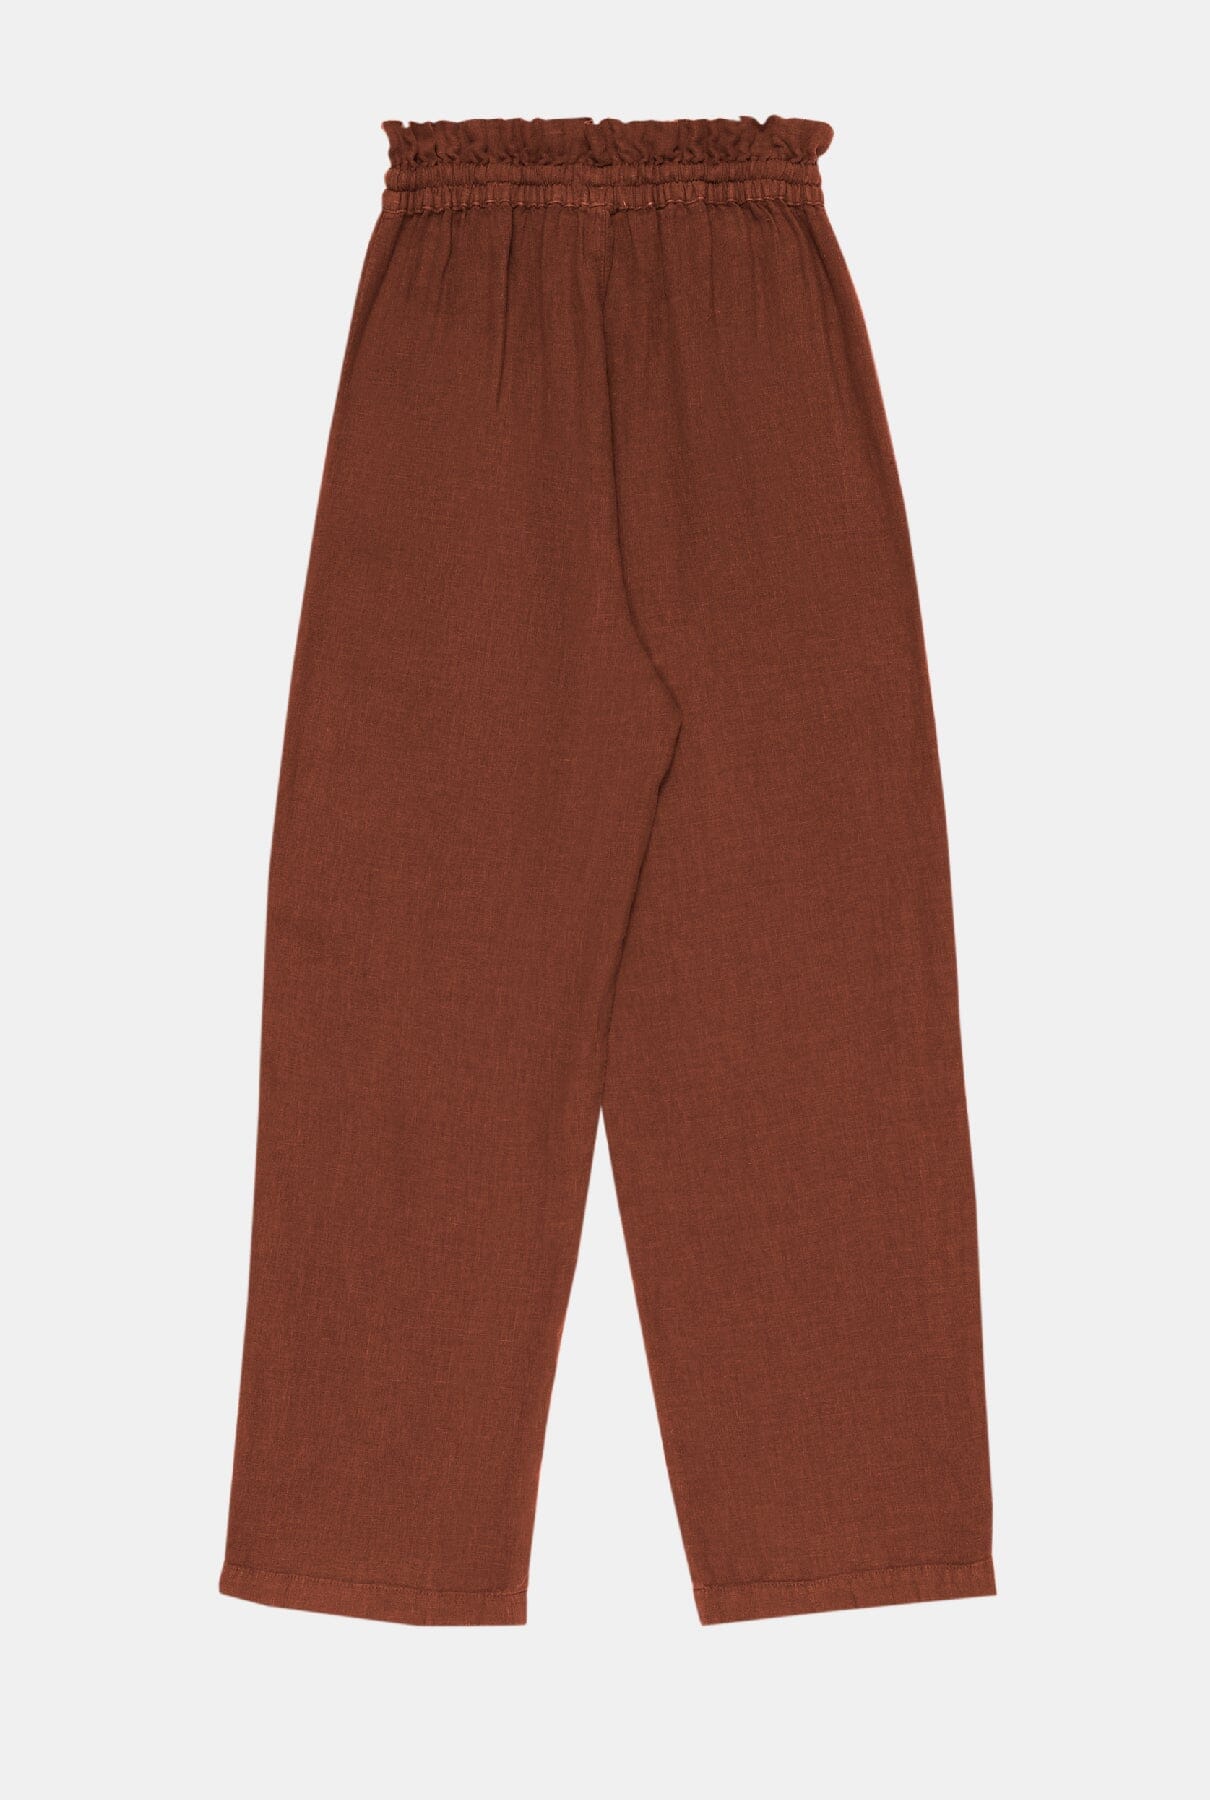 Long Beach Woman Pant Sequoia Trousers The New Society 